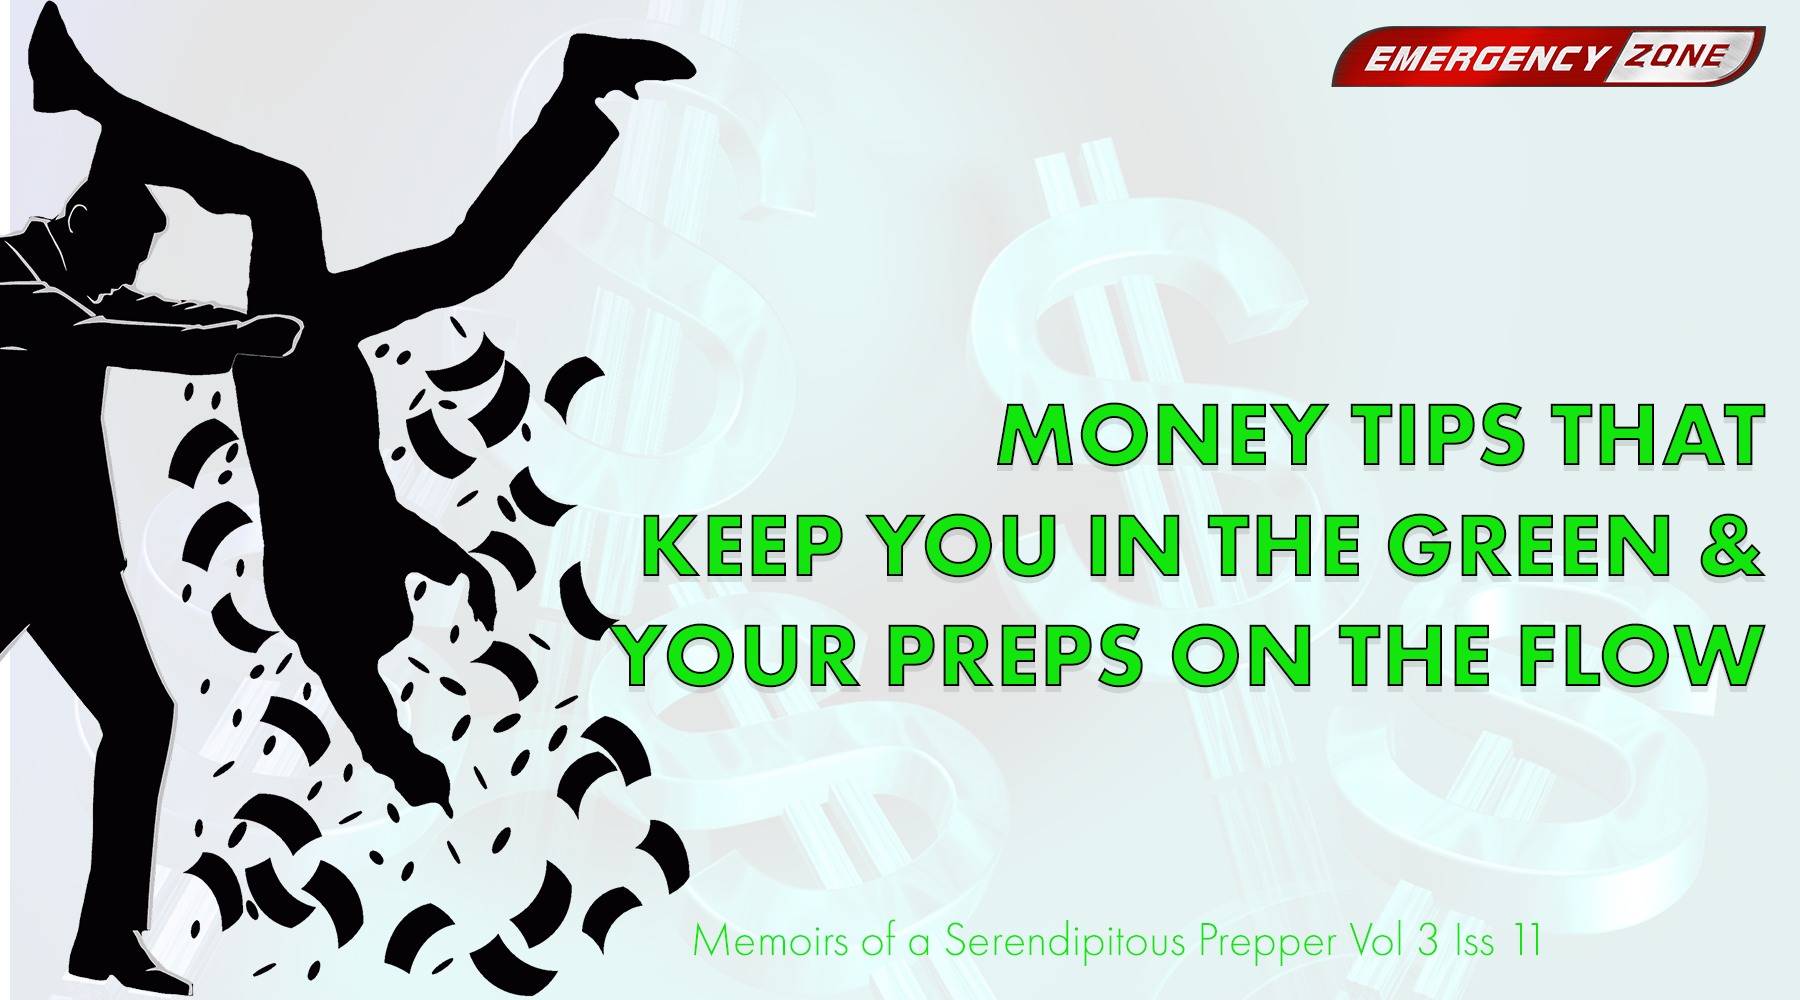 Money Tips That Keep You in the Green & Your Preps on the Flow